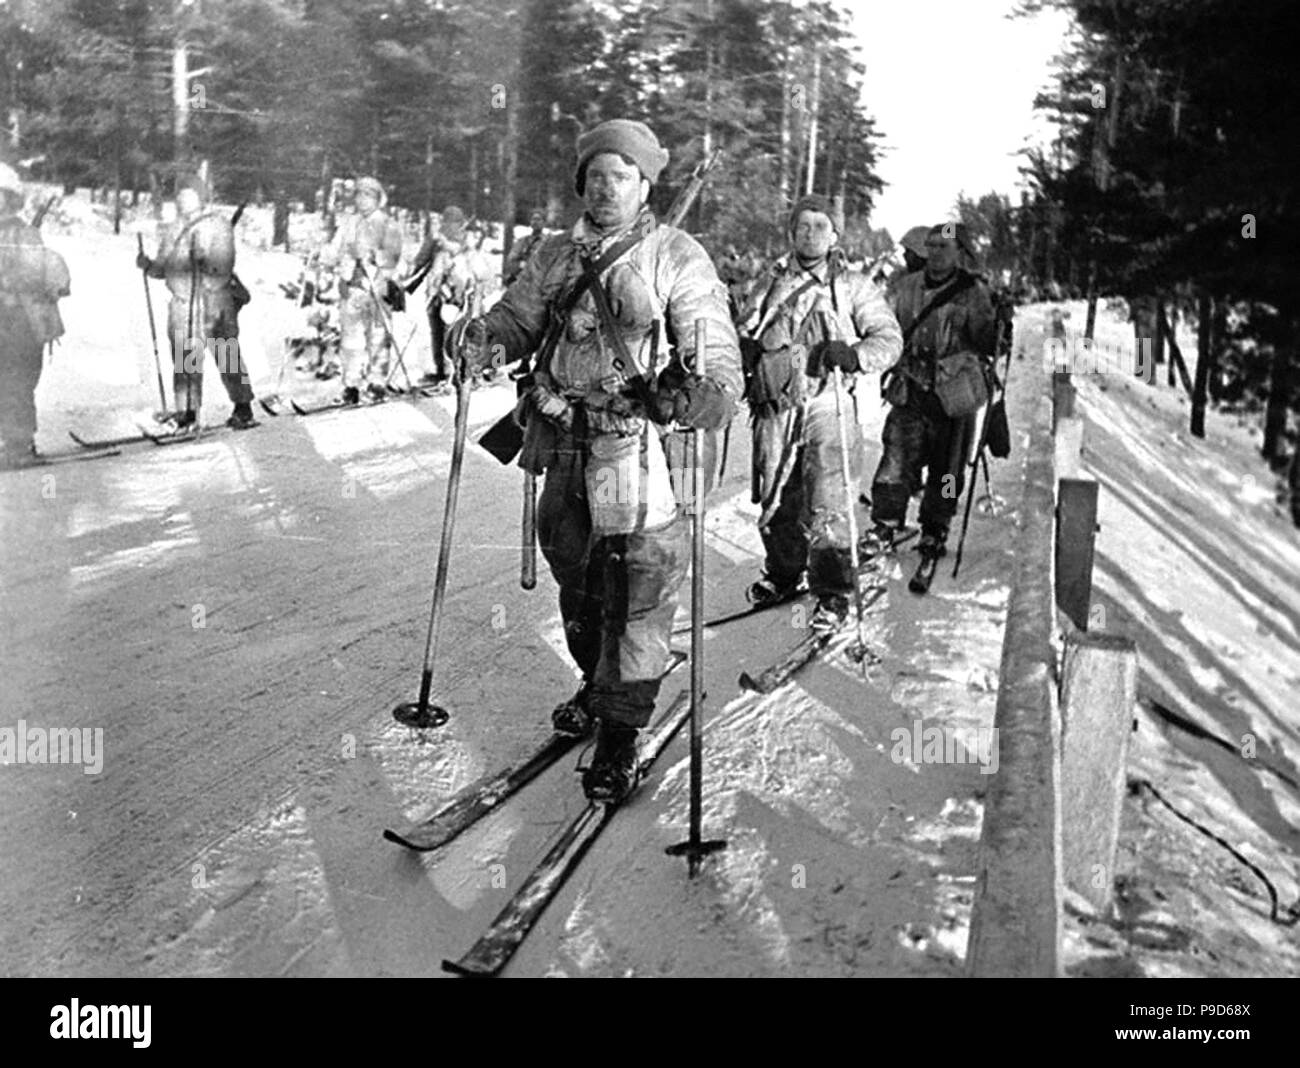 Red Army ski troops. The Winter War. 1940. Museum: Russian State Film and Photo Archive, Krasnogorsk. Stock Photo